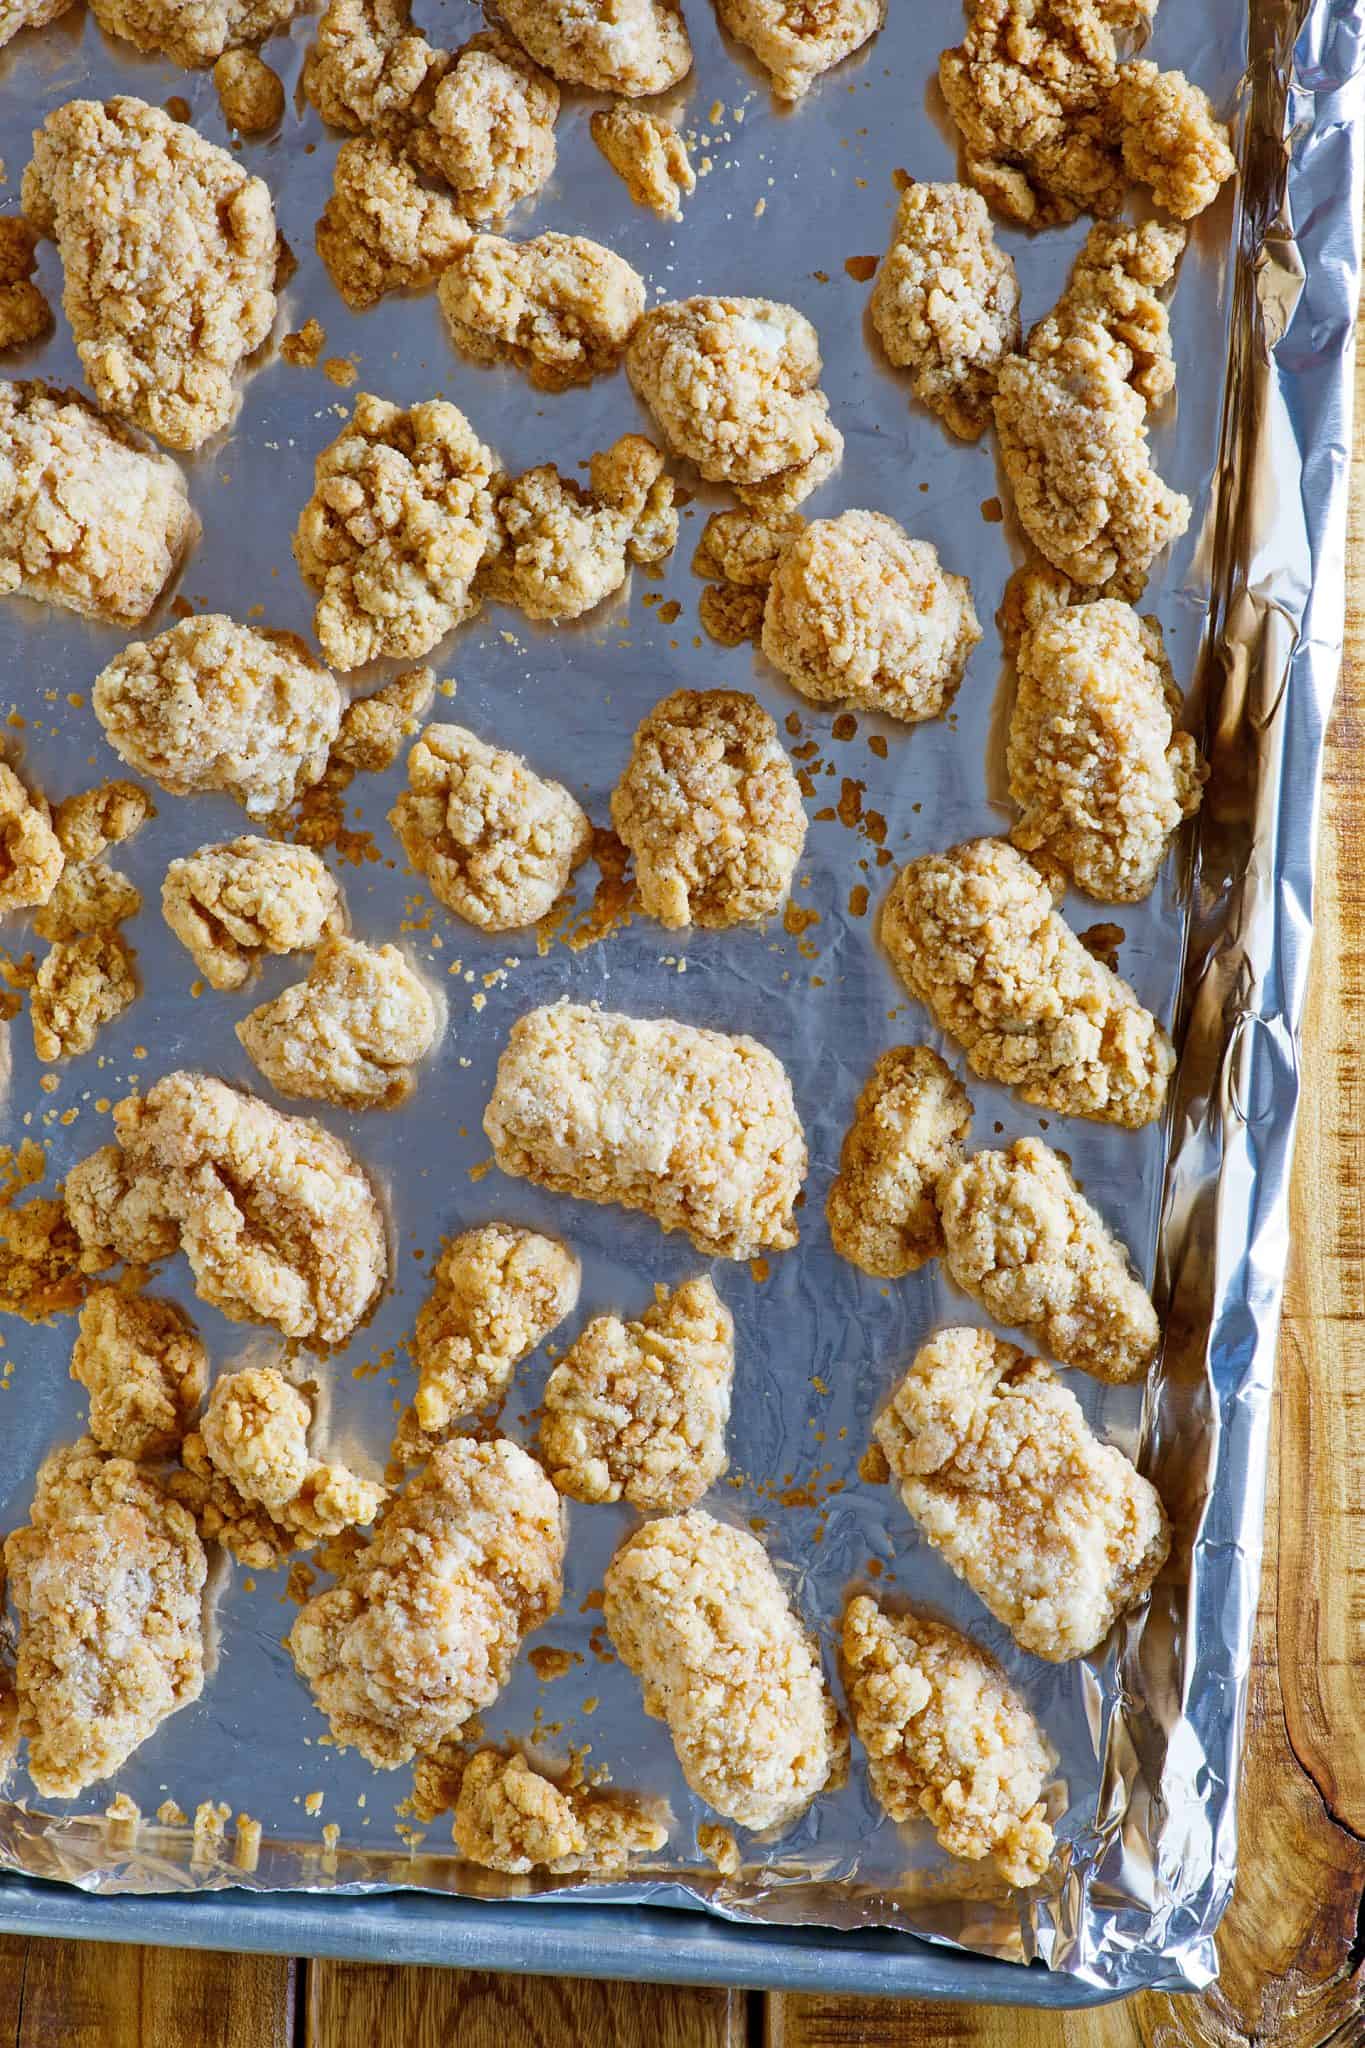 frozen popcorn chicken on baking sheet lined with aluminum foil.